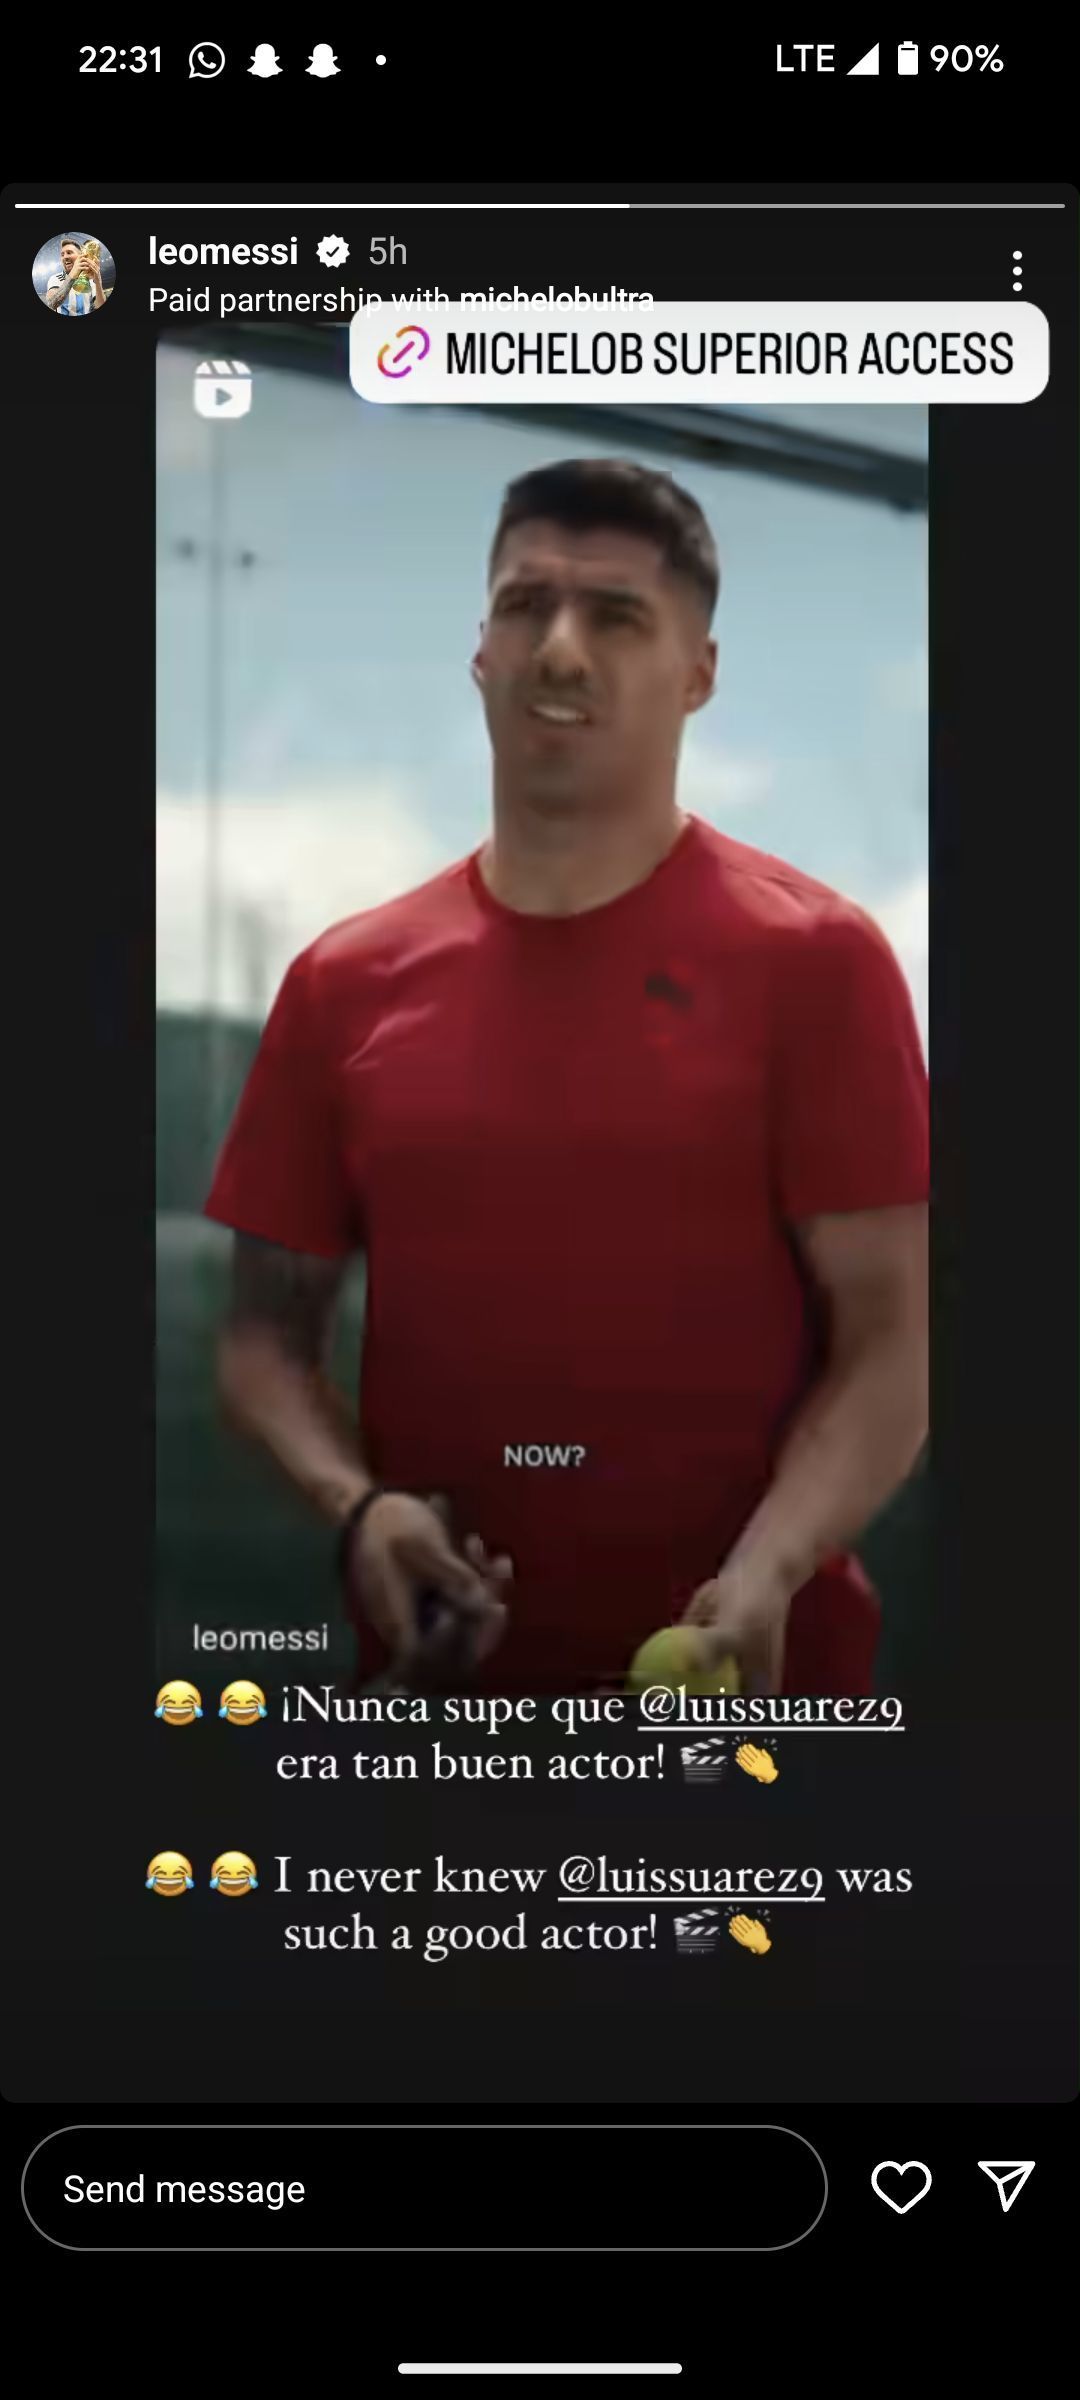 Lionel Messi reacts to an advert in which Luis Suarez starred